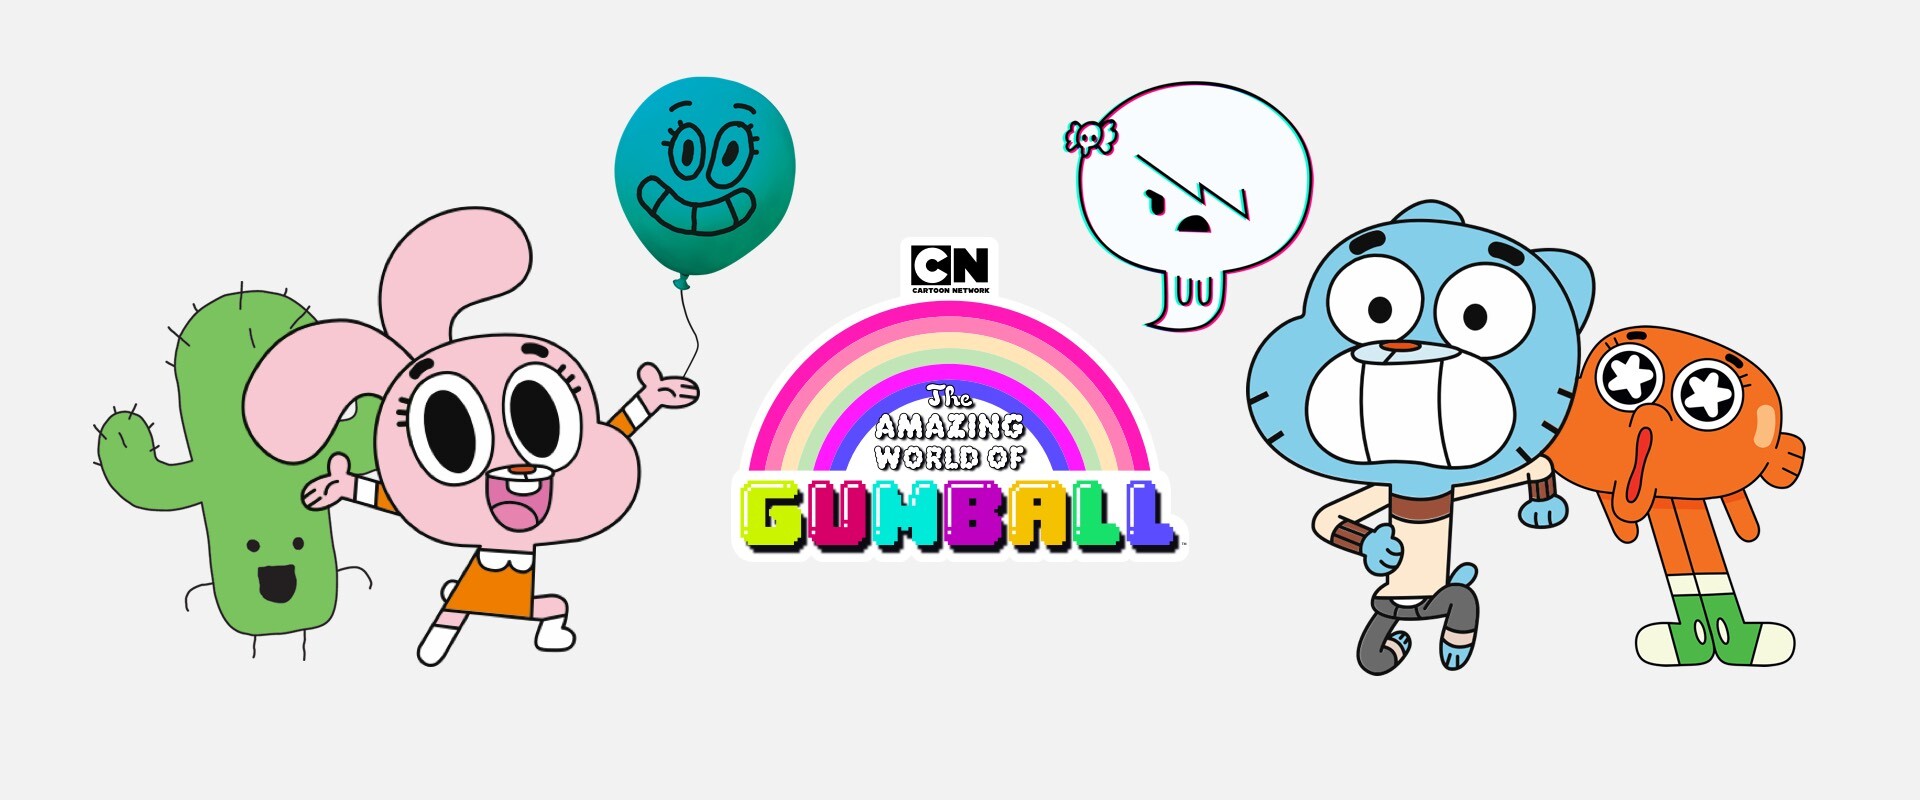 Gumball VIP - Apps on Google Play